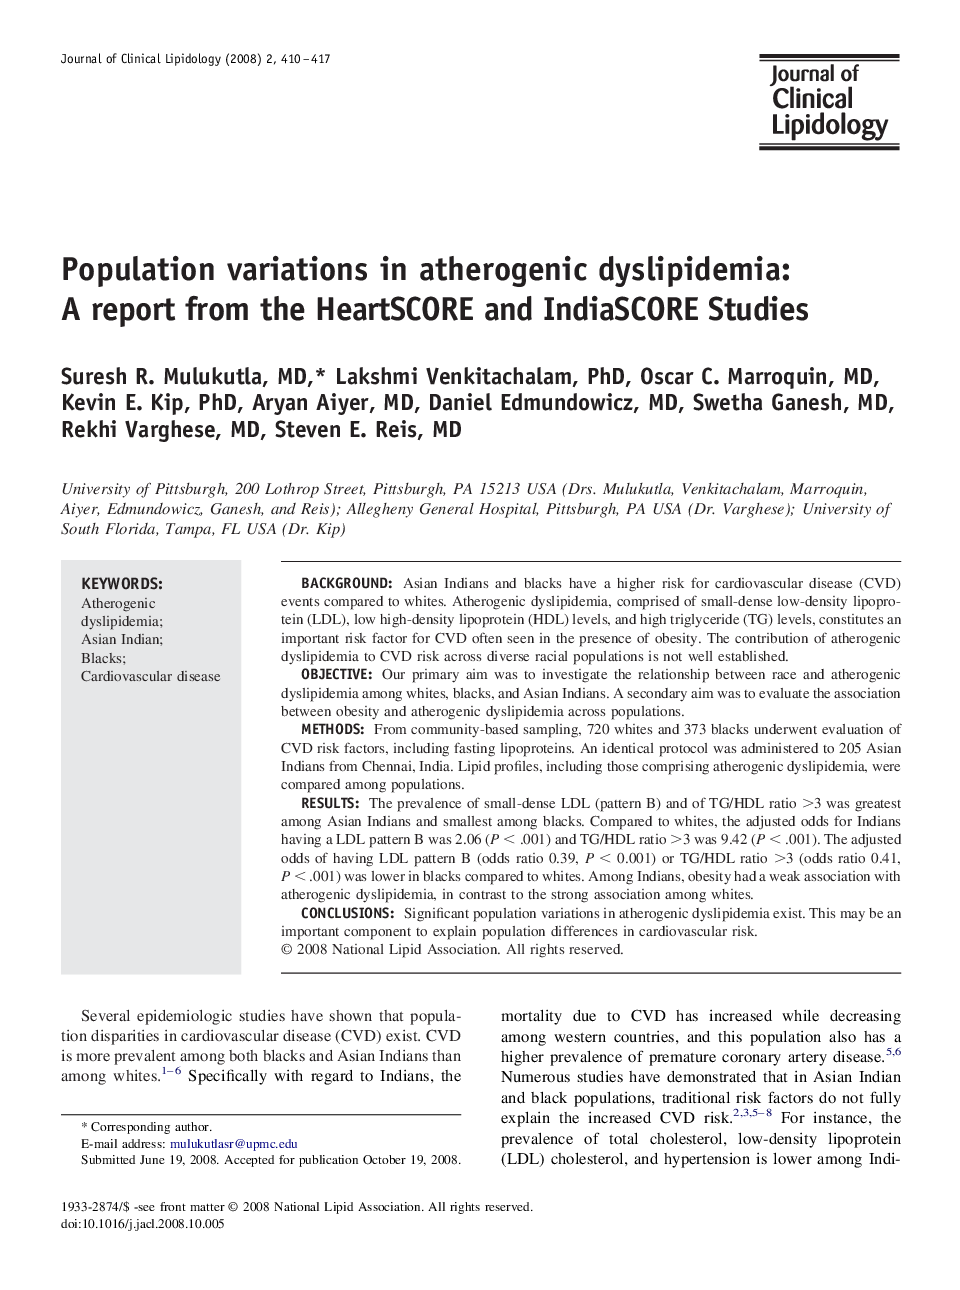 Population variations in atherogenic dyslipidemia: A report from the HeartSCORE and IndiaSCORE Studies